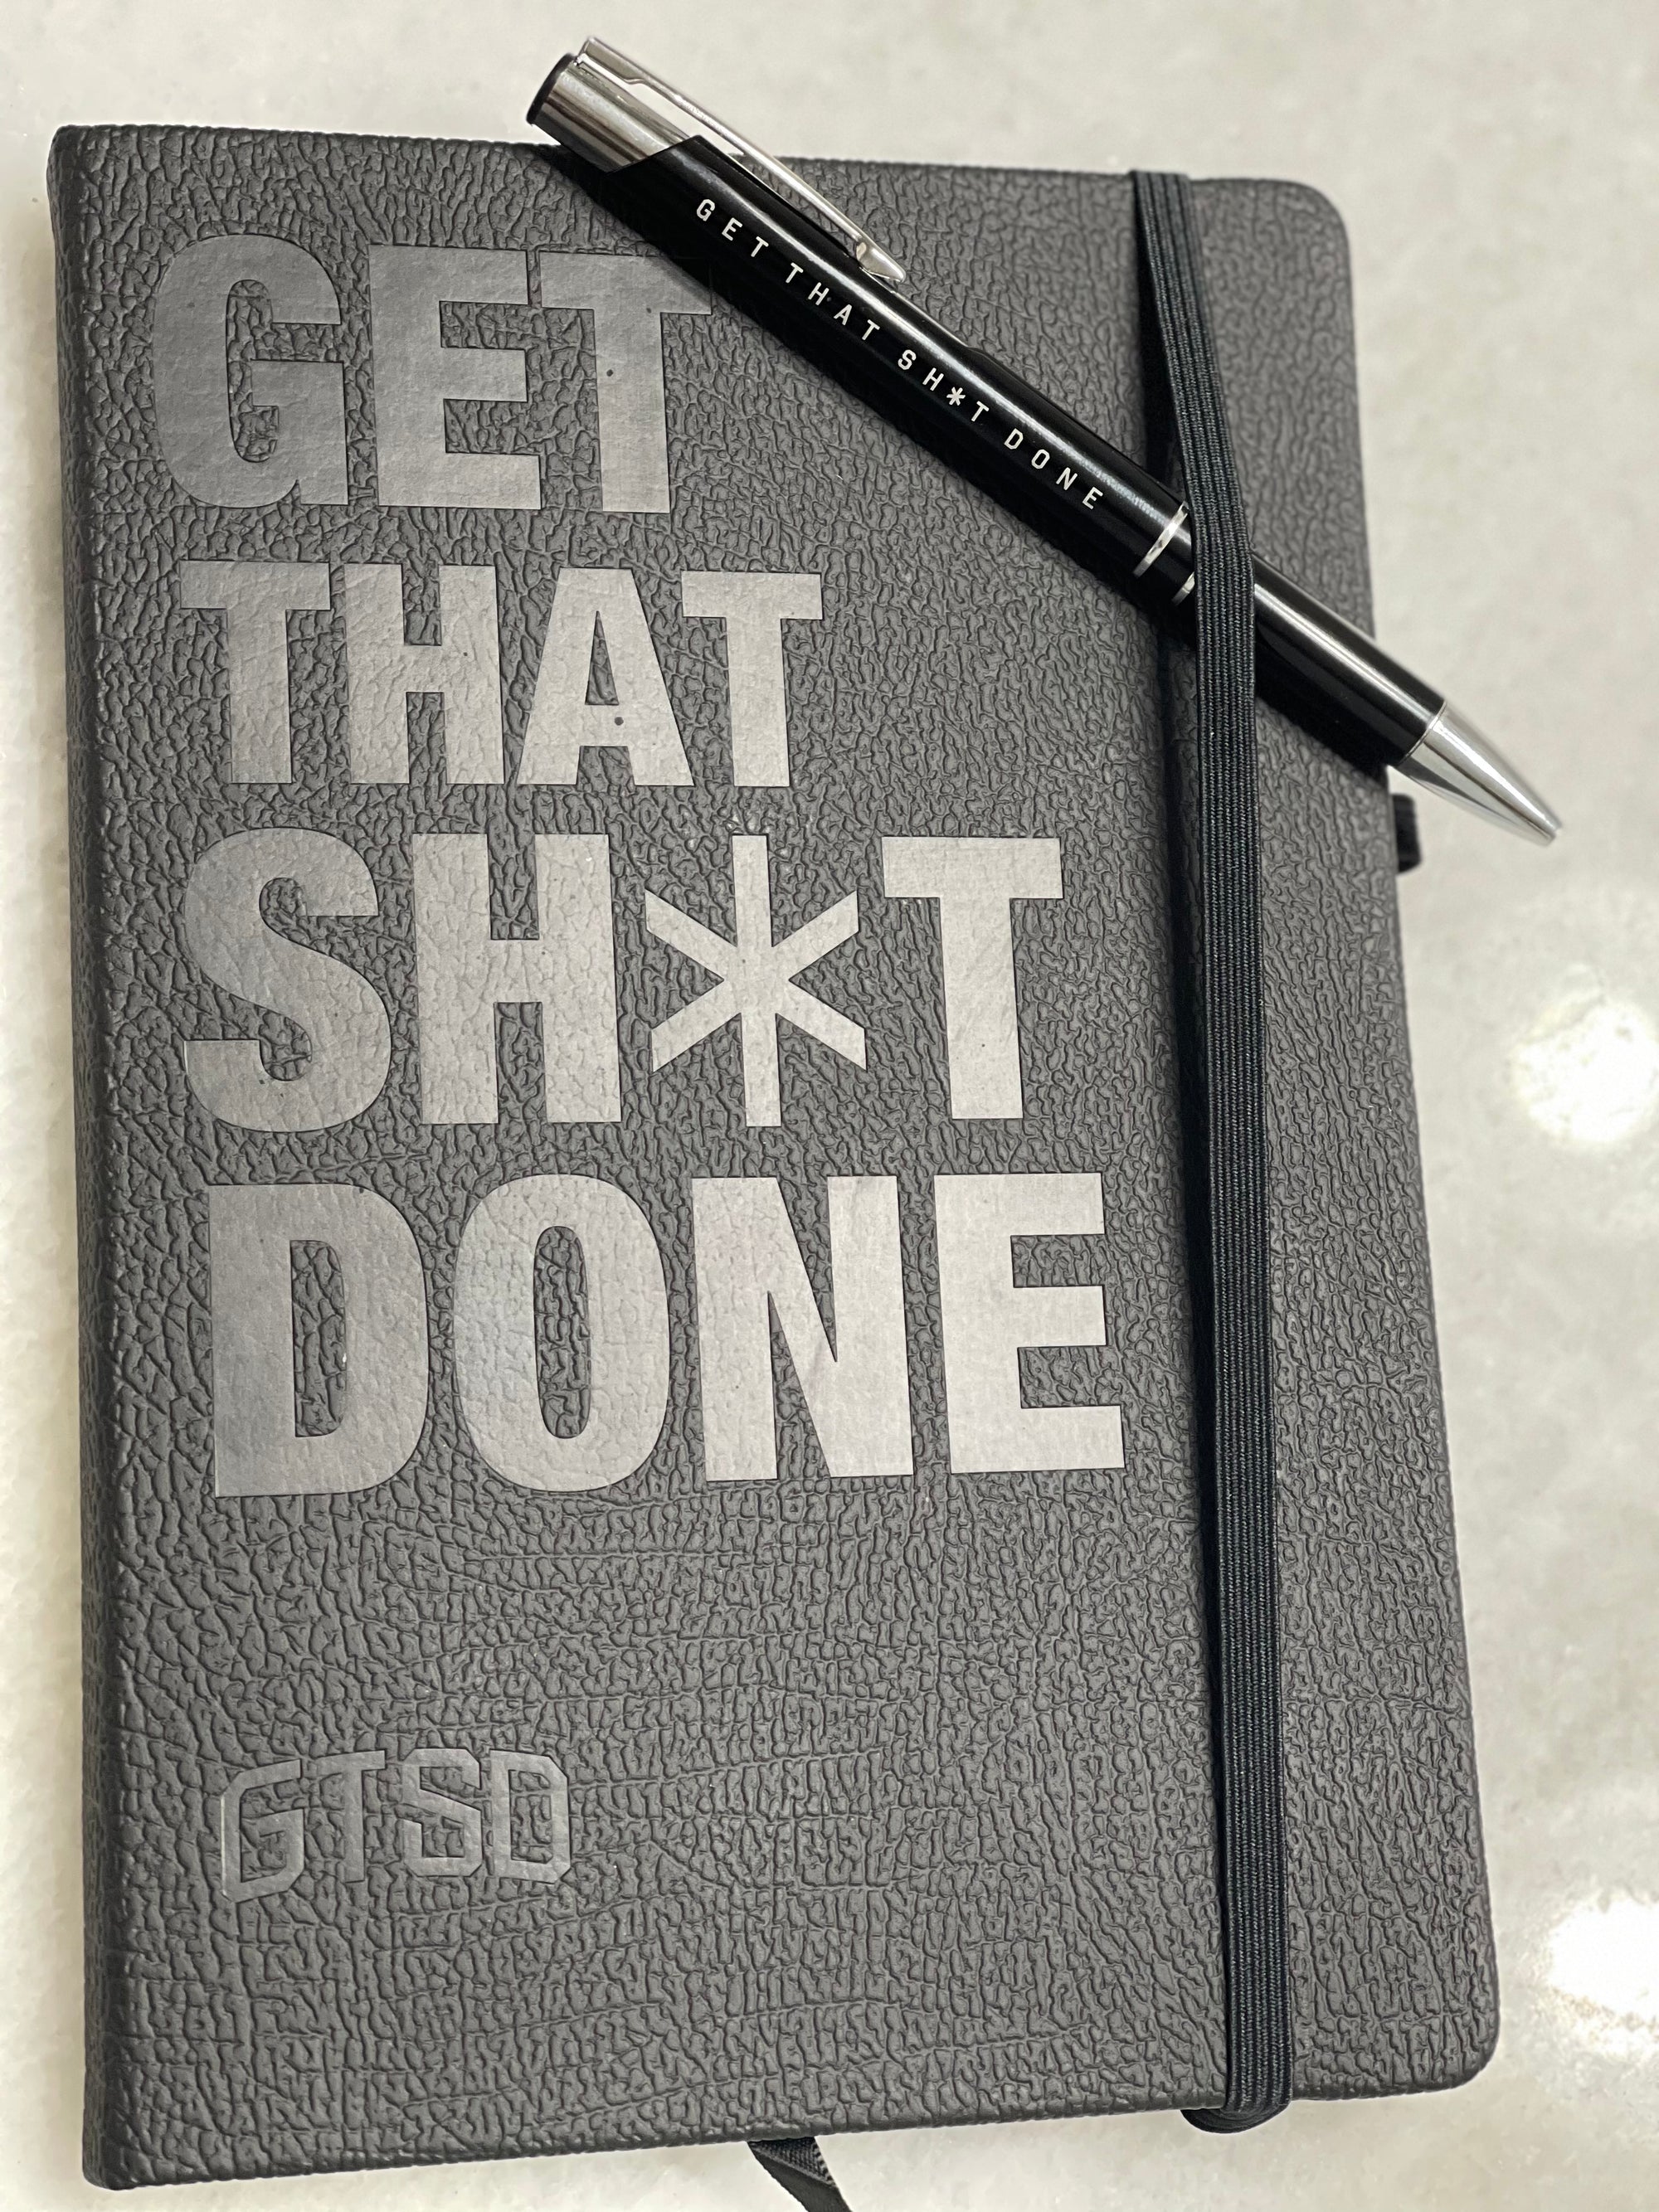 GTSD Personal Journal and pen